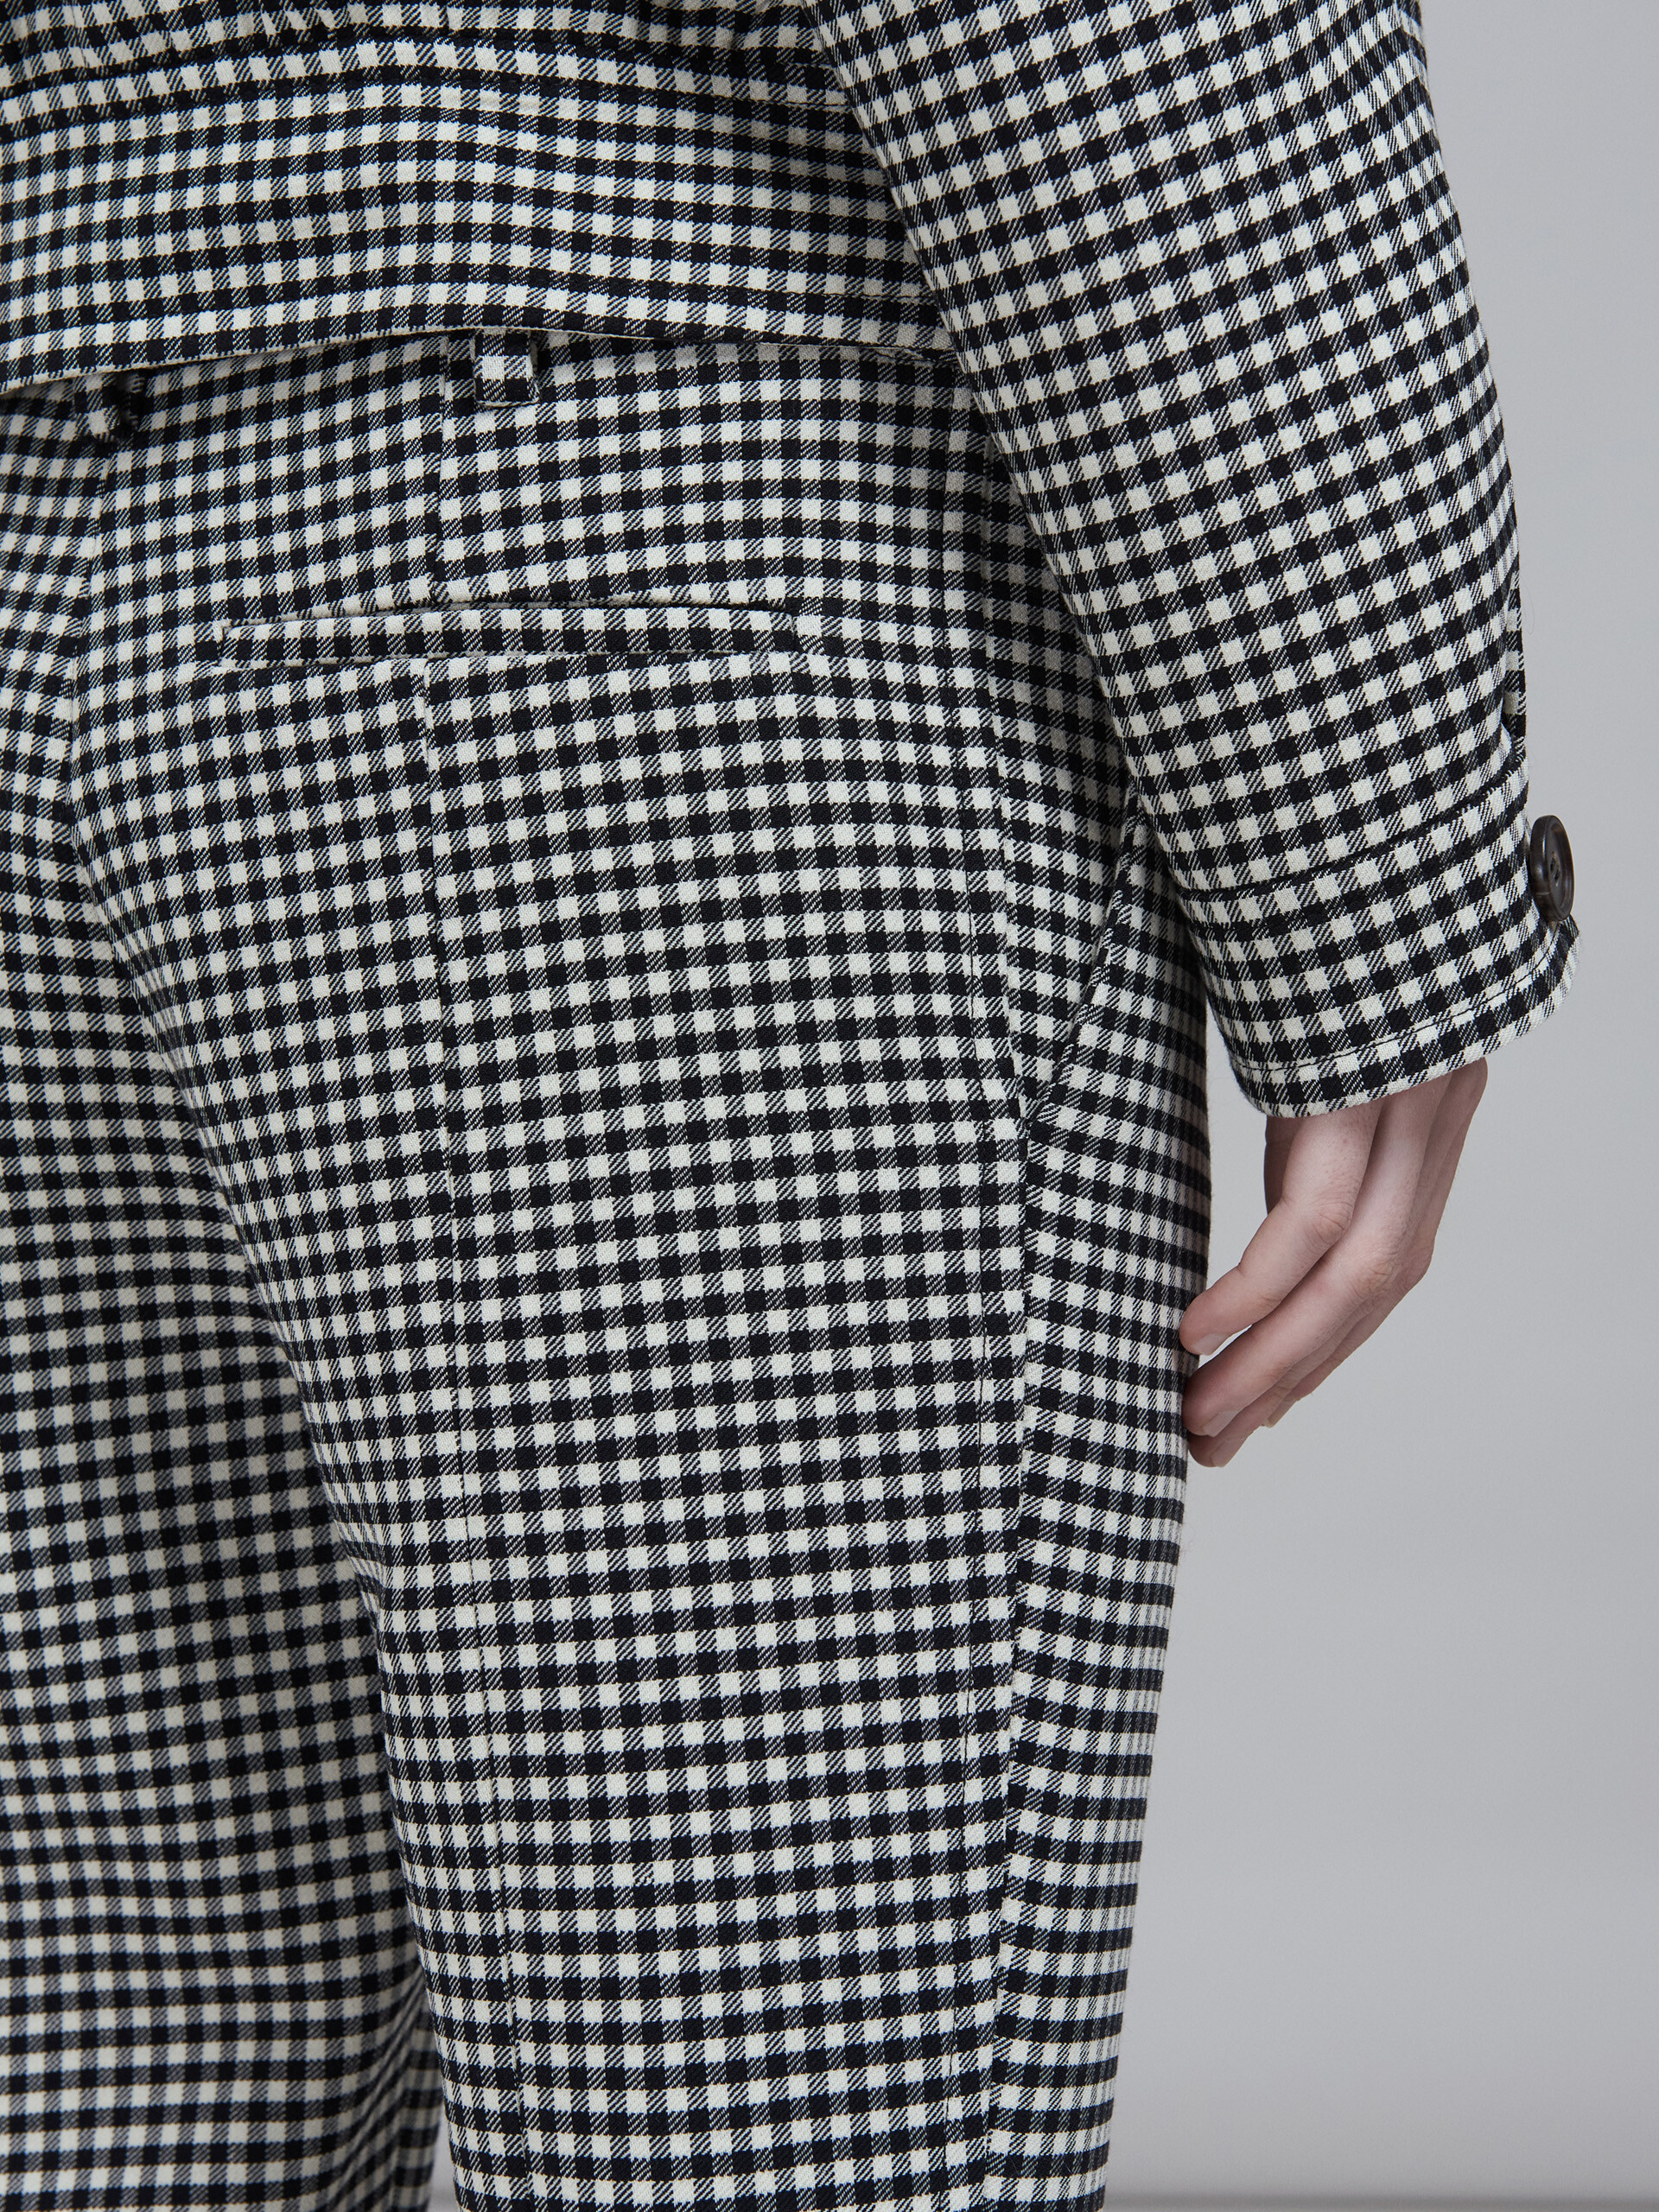 Double-faced houndstooth wool trousers - Pants - Image 4